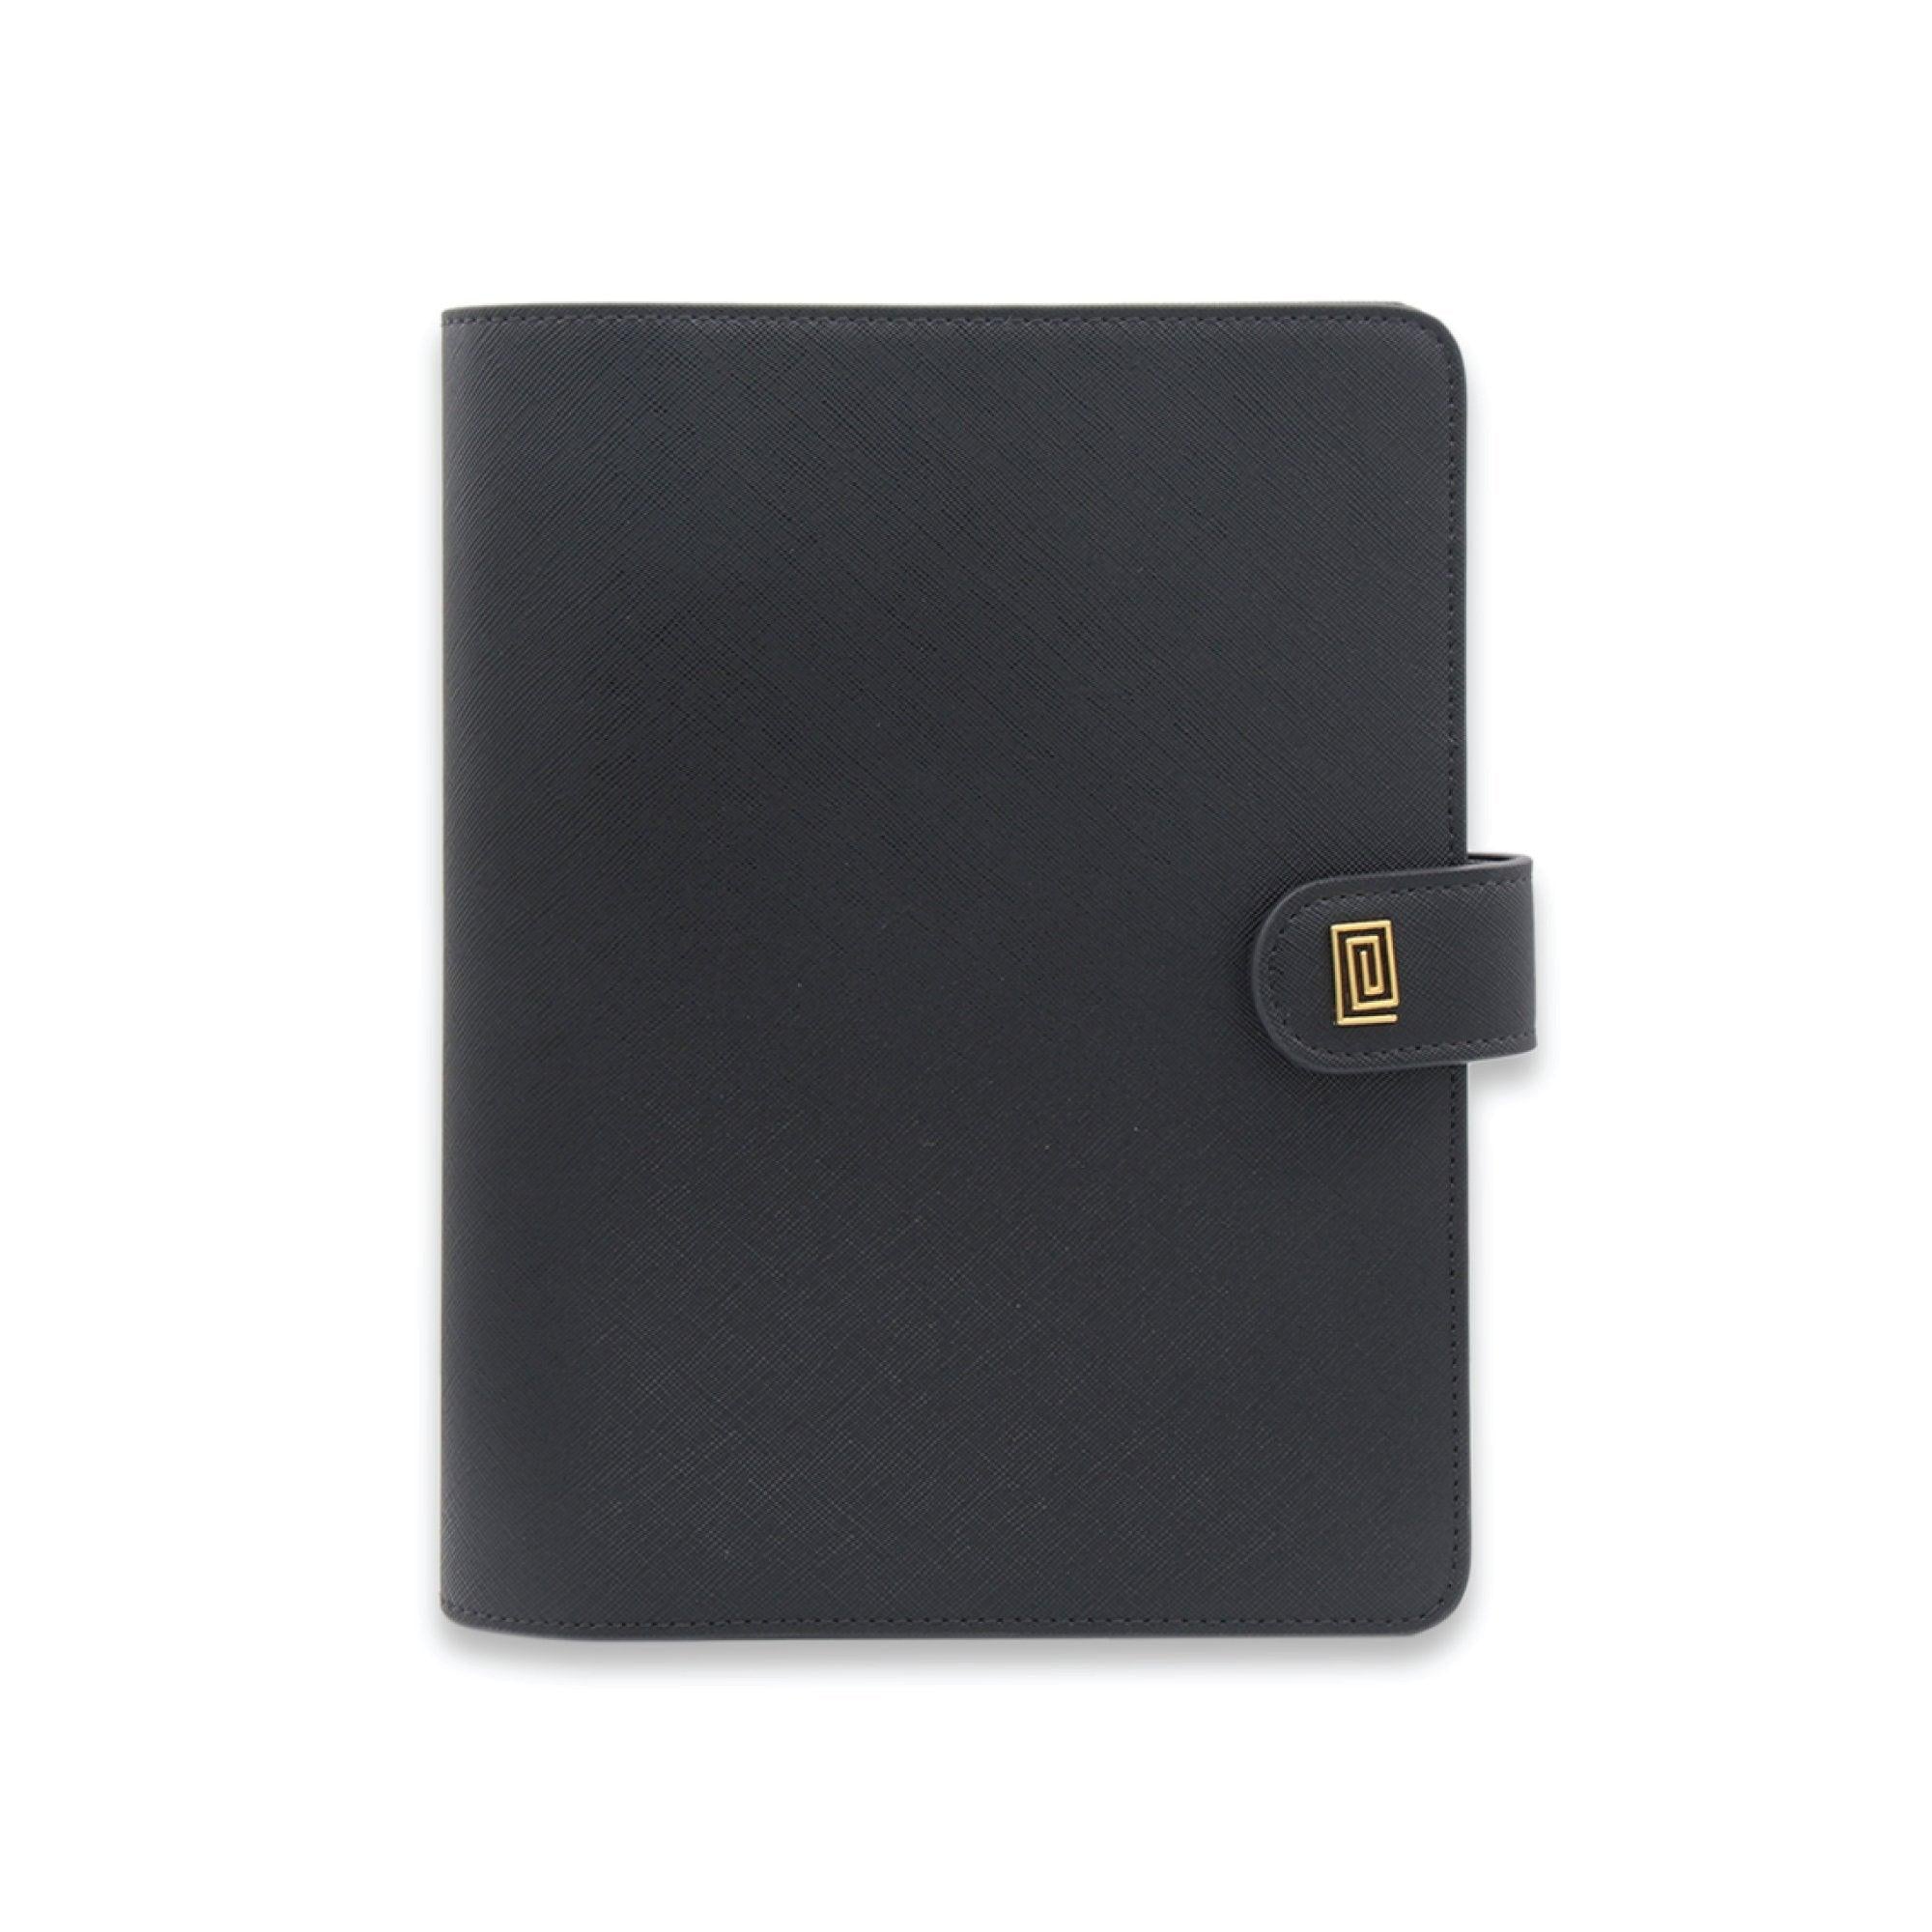 Gold on Jet Black Saffiano Letra | OUTLET | XL5. Letra Plus Ringless Agenda | Letter 11 Disc or Coil Planner Cover | Final Sale | NOTIQ